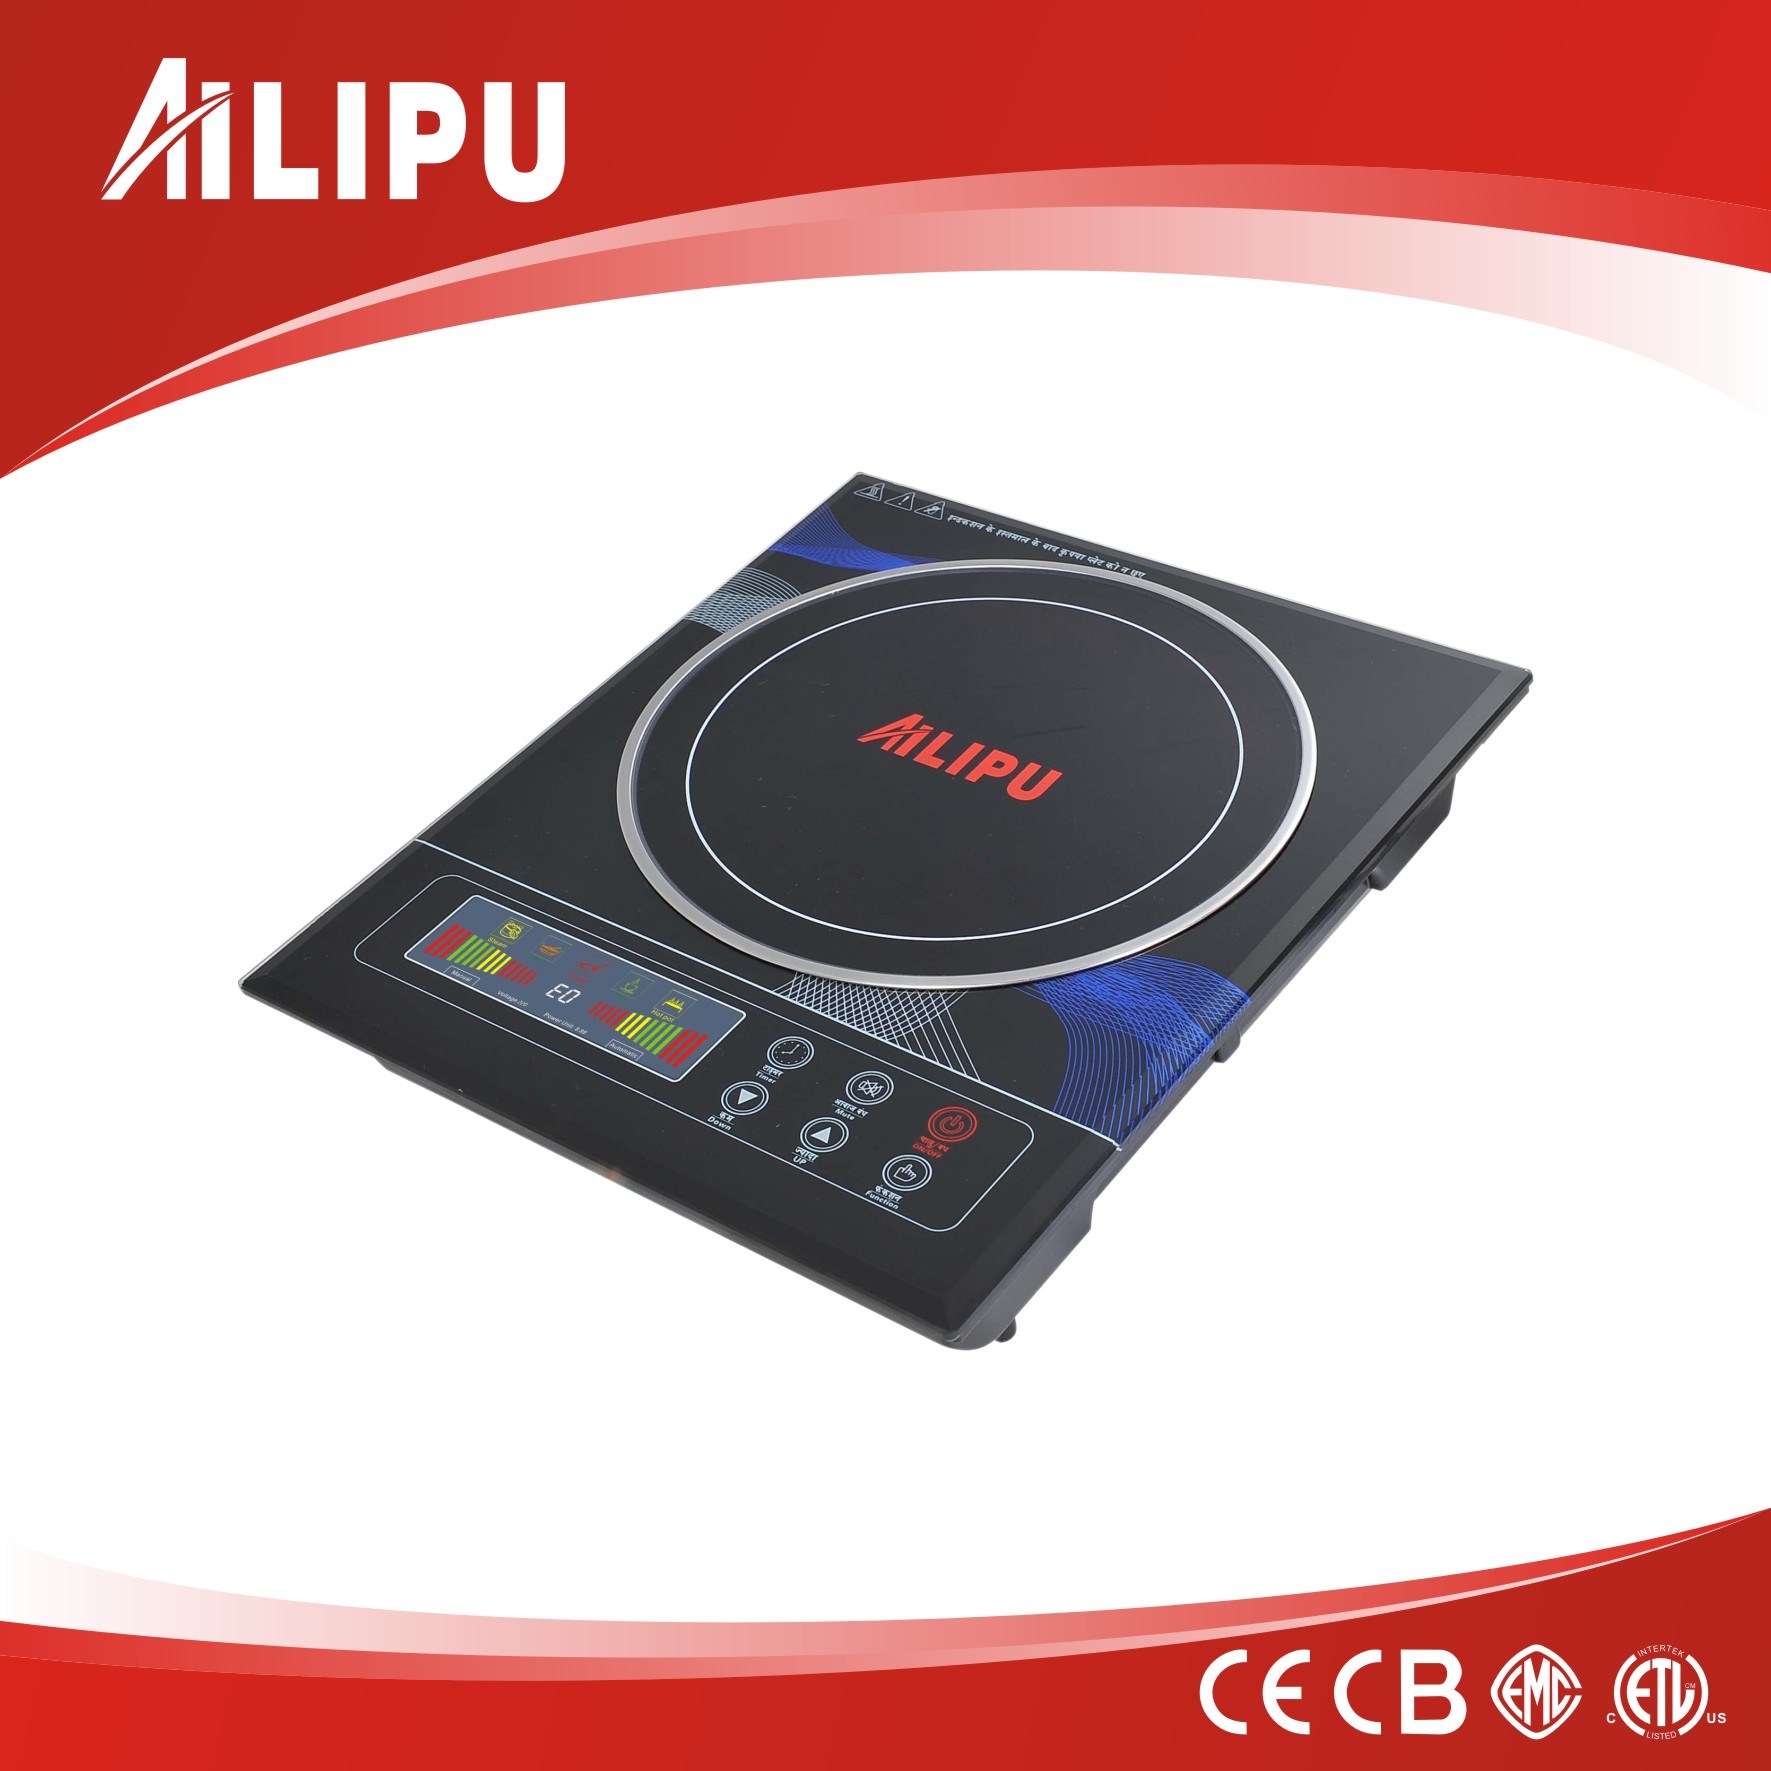 2015 Best Selling LCD Display Electric Induction Cooker with Touch Control